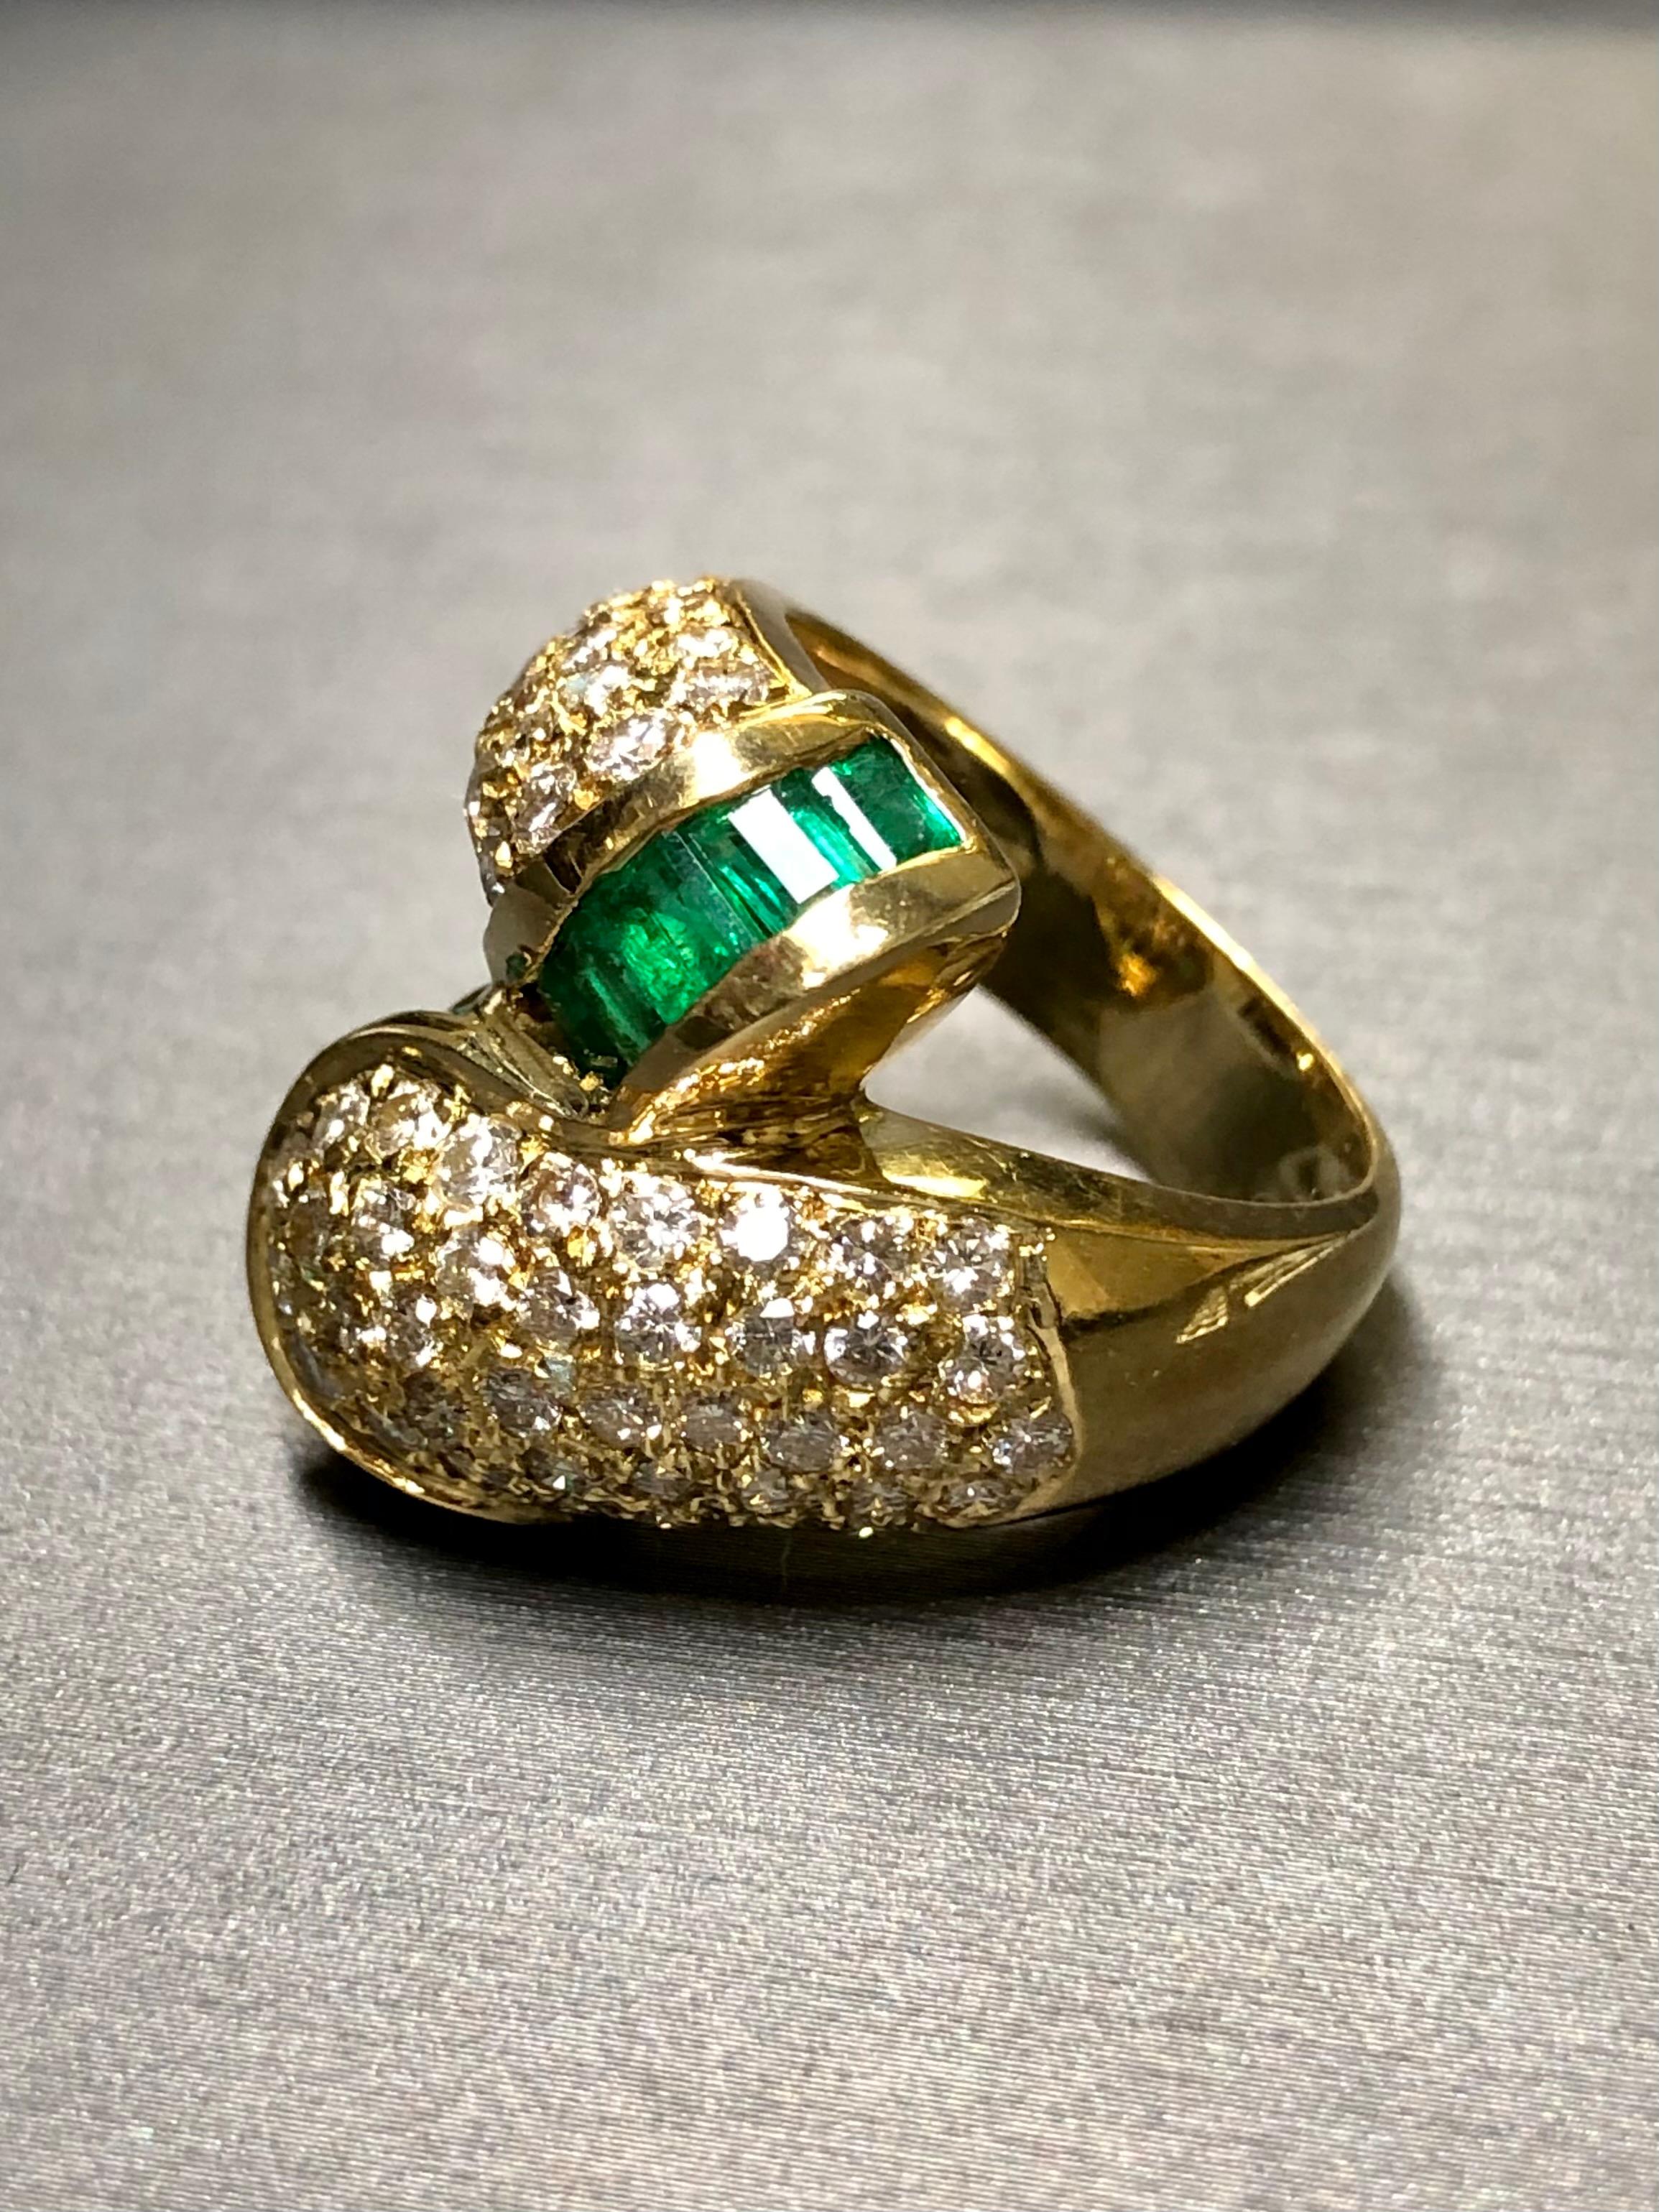 Vintage 18K Emerald Pave Diamond Bypass Large Cocktail Ring 4.30cttw Sz 7.75 For Sale 5